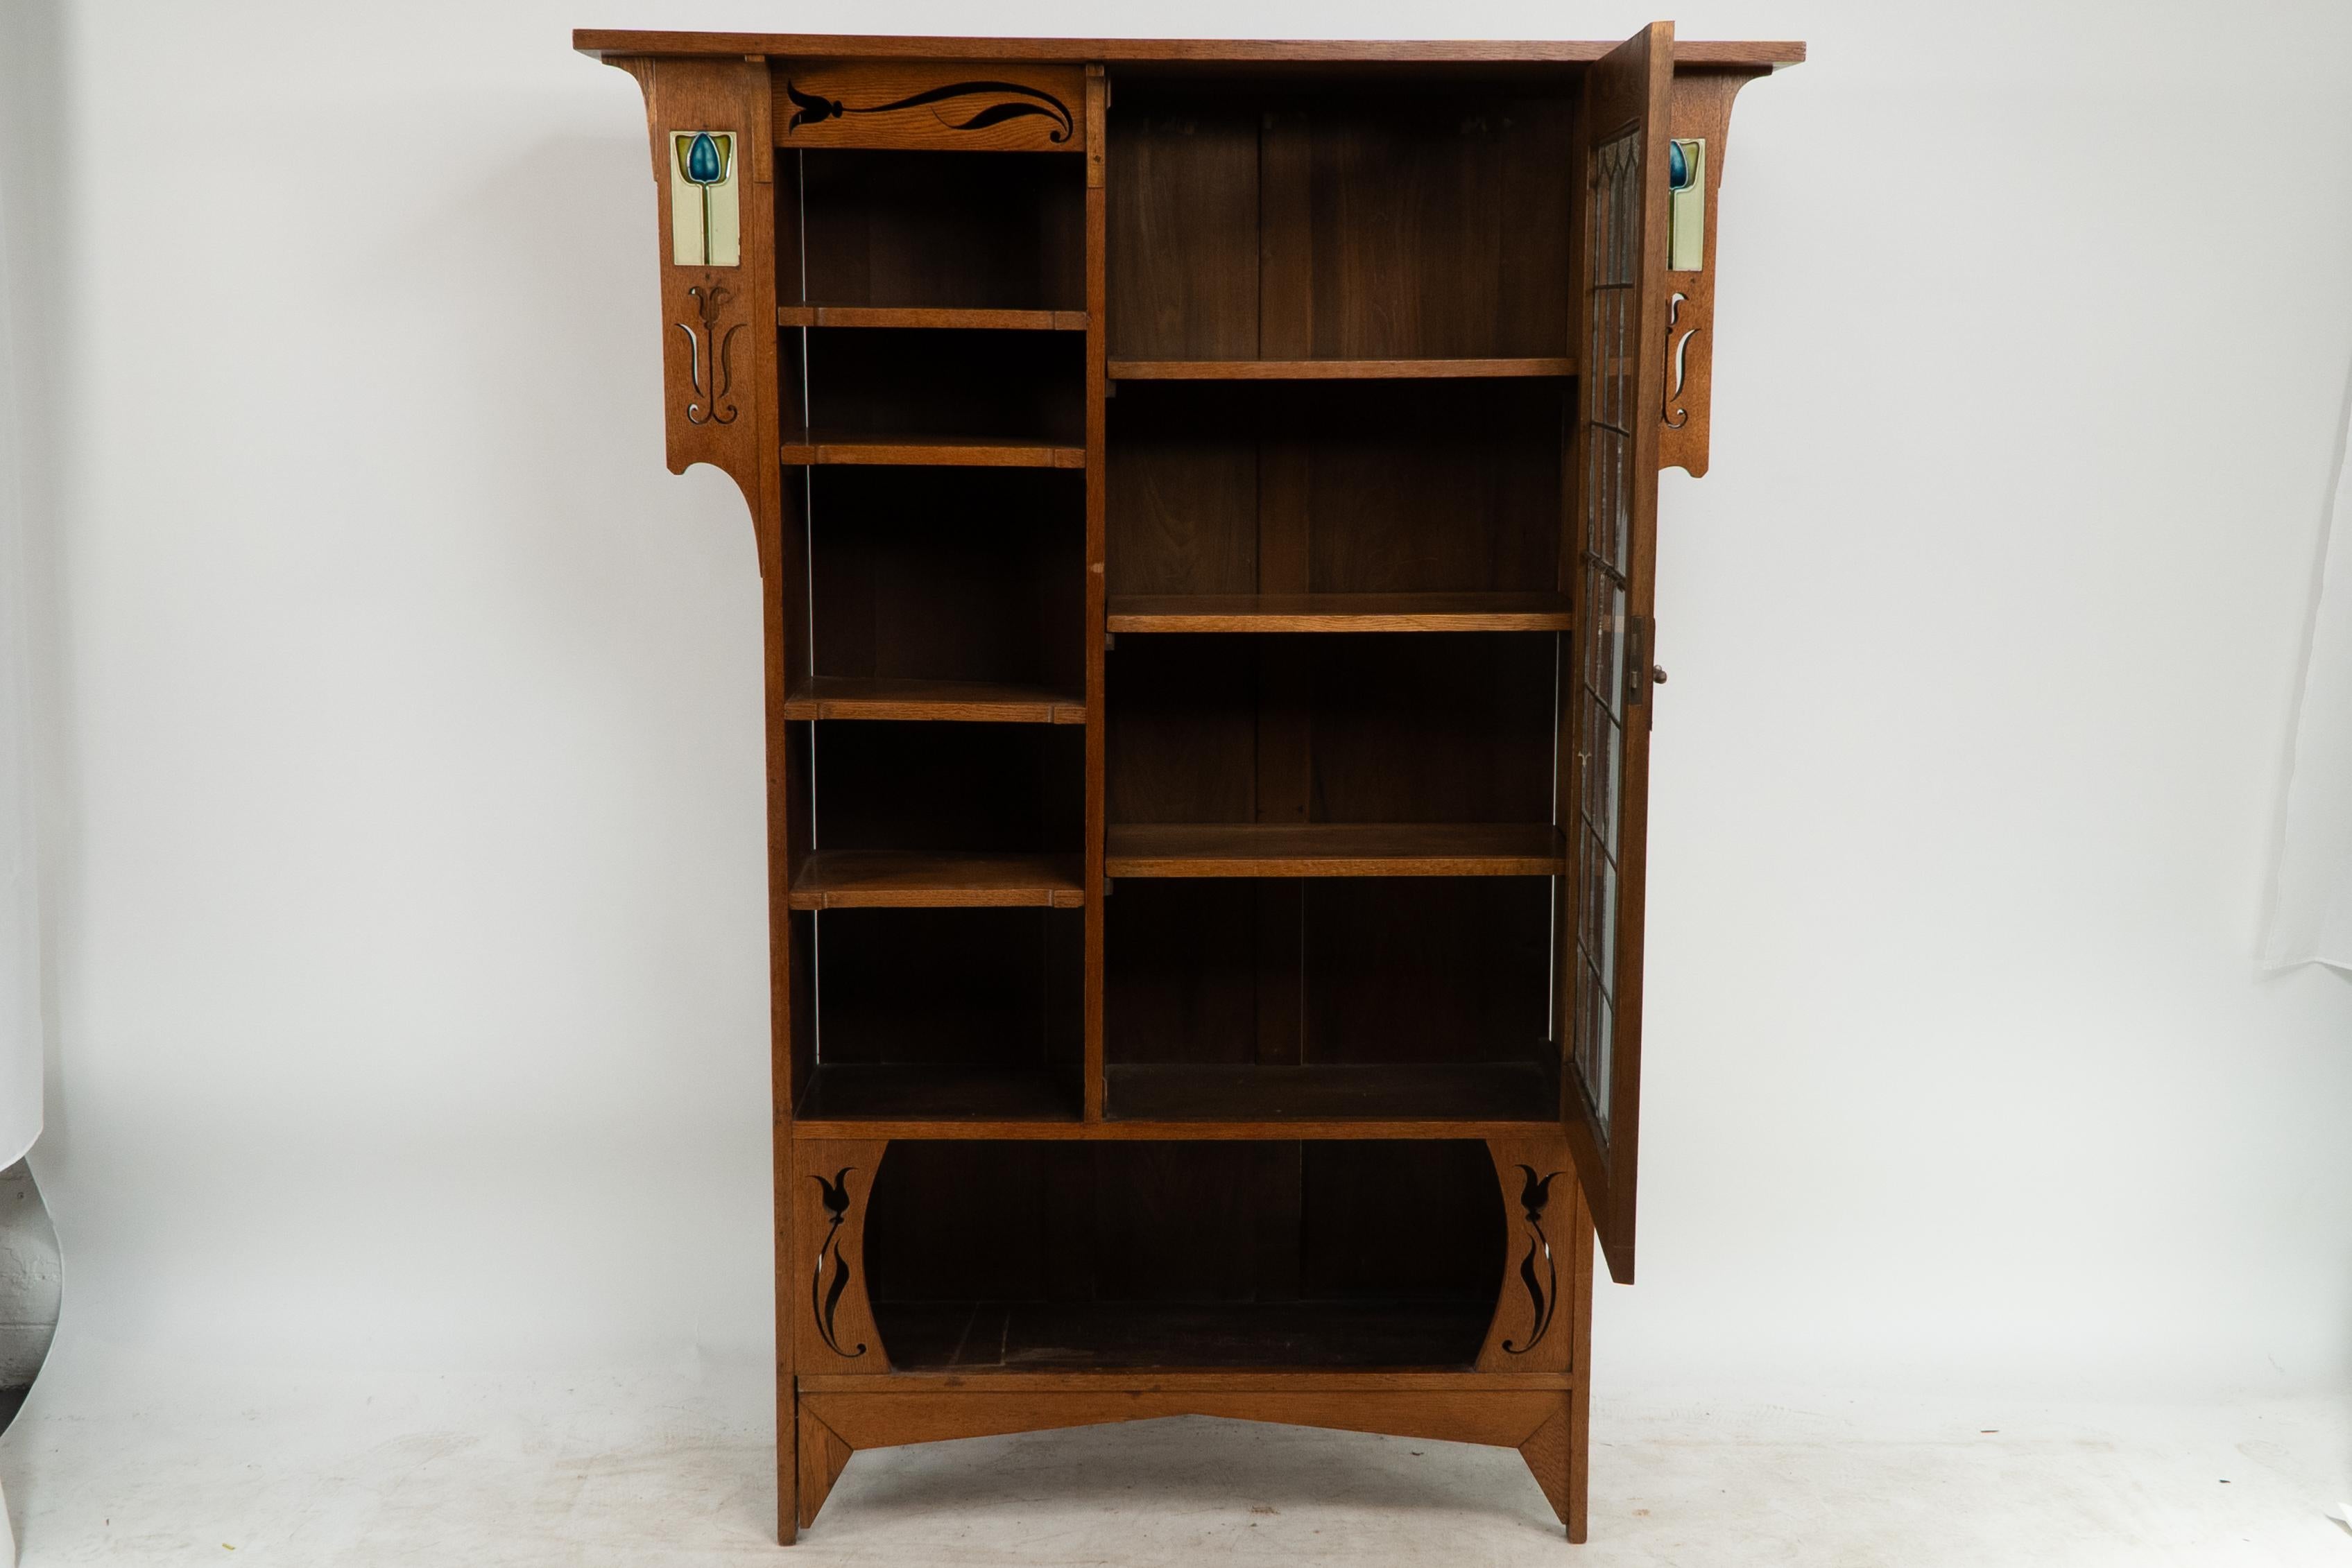 An Arts and Crafts oak bookcase with extended upper sides and inset with original Tulip tiles with stylized floral cut-outs. Adjustable book/display shelves to the left and a stain glass door with decorative hinges and handle.
 